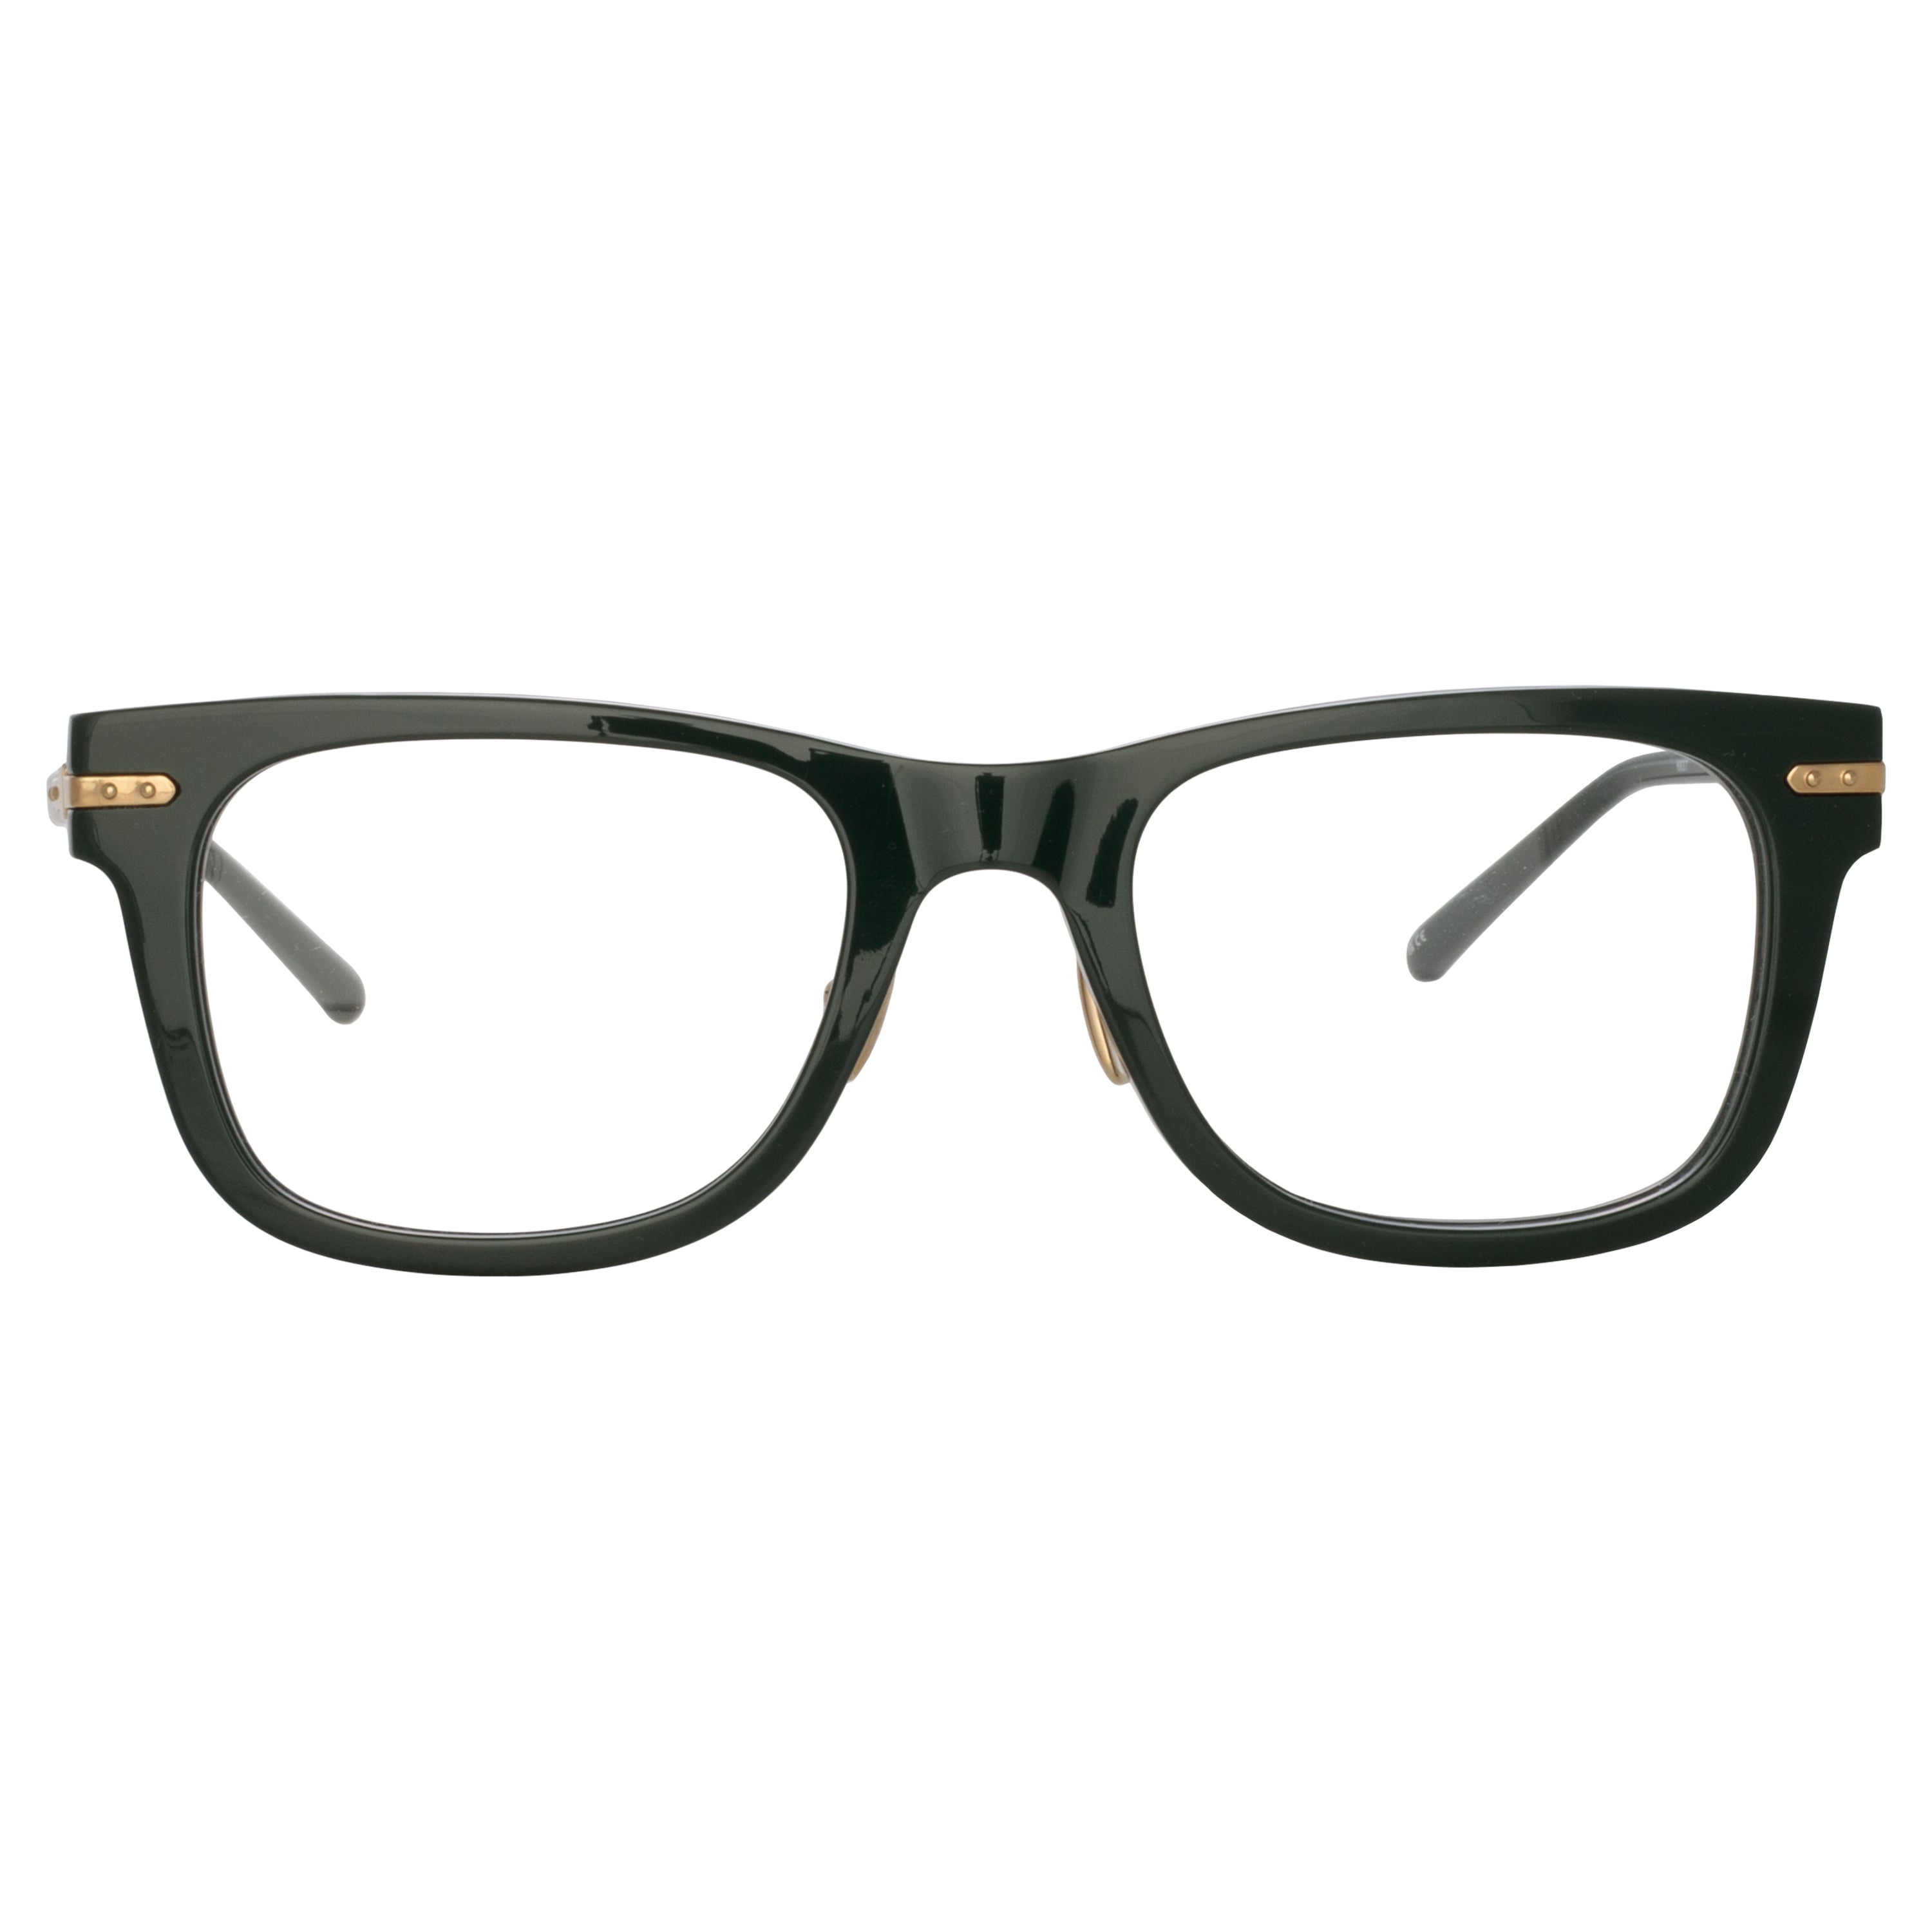 MEN'S PORTICO OPTICAL D-FRAME IN FOREST GREEN (ASIAN FIT) - 1